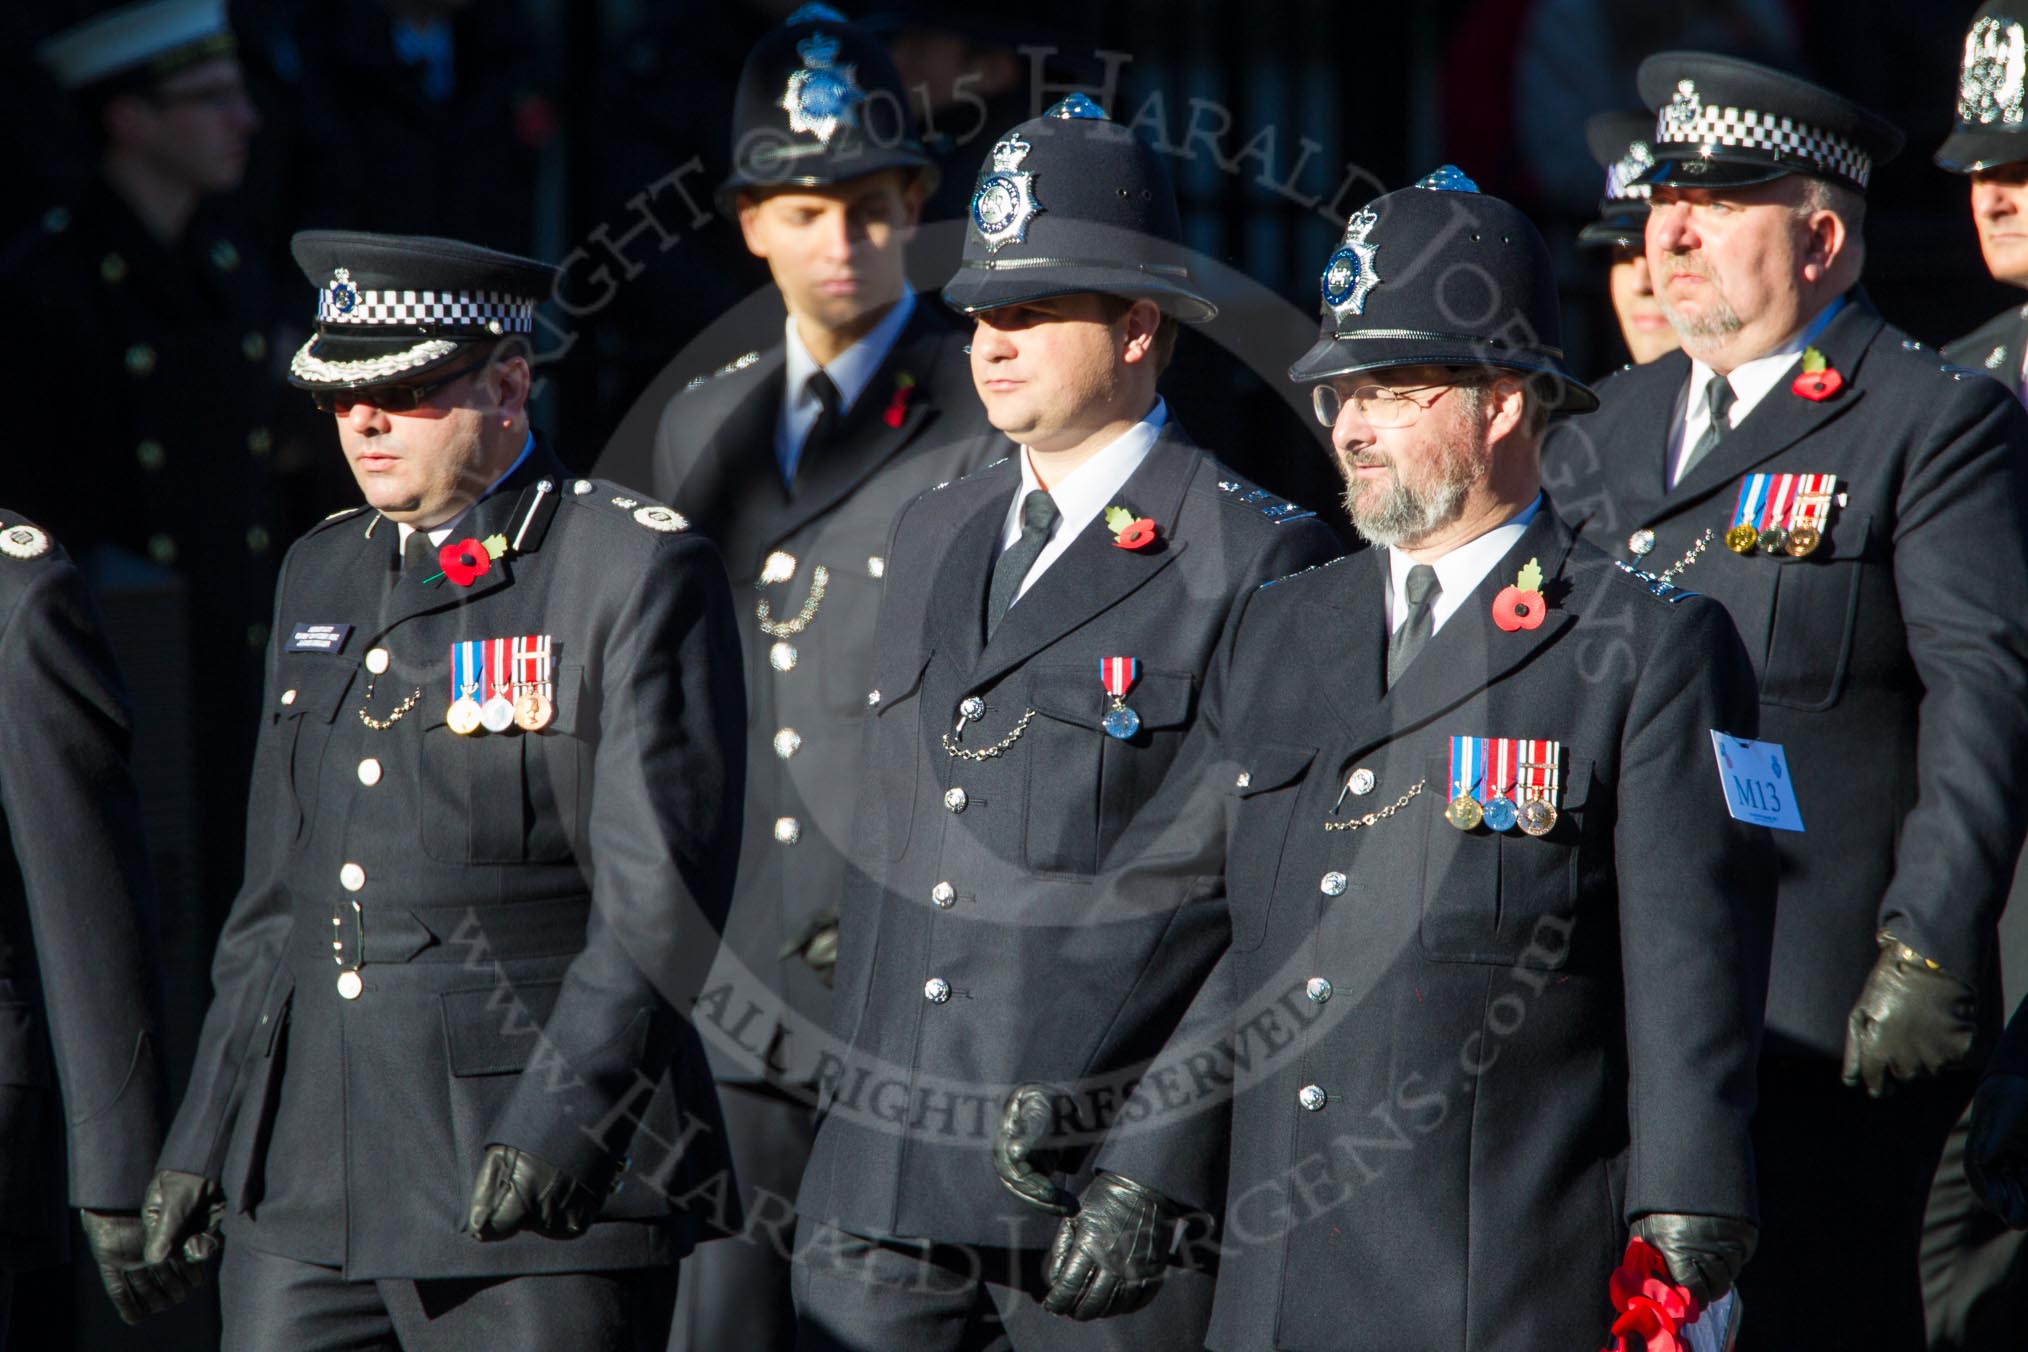 Remembrance Sunday Cenotaph March Past 2013: M13 - Metropolitan Special Constabulary. The Metropolitan Special Constabulary (MSC) is the part-time volunteer police service of the Metropolitan Police Service. The wreath bearer is Special Sergeant Michael Johnson from Hounslow Borough..
Press stand opposite the Foreign Office building, Whitehall, London SW1,
London,
Greater London,
United Kingdom,
on 10 November 2013 at 12:10, image #1961